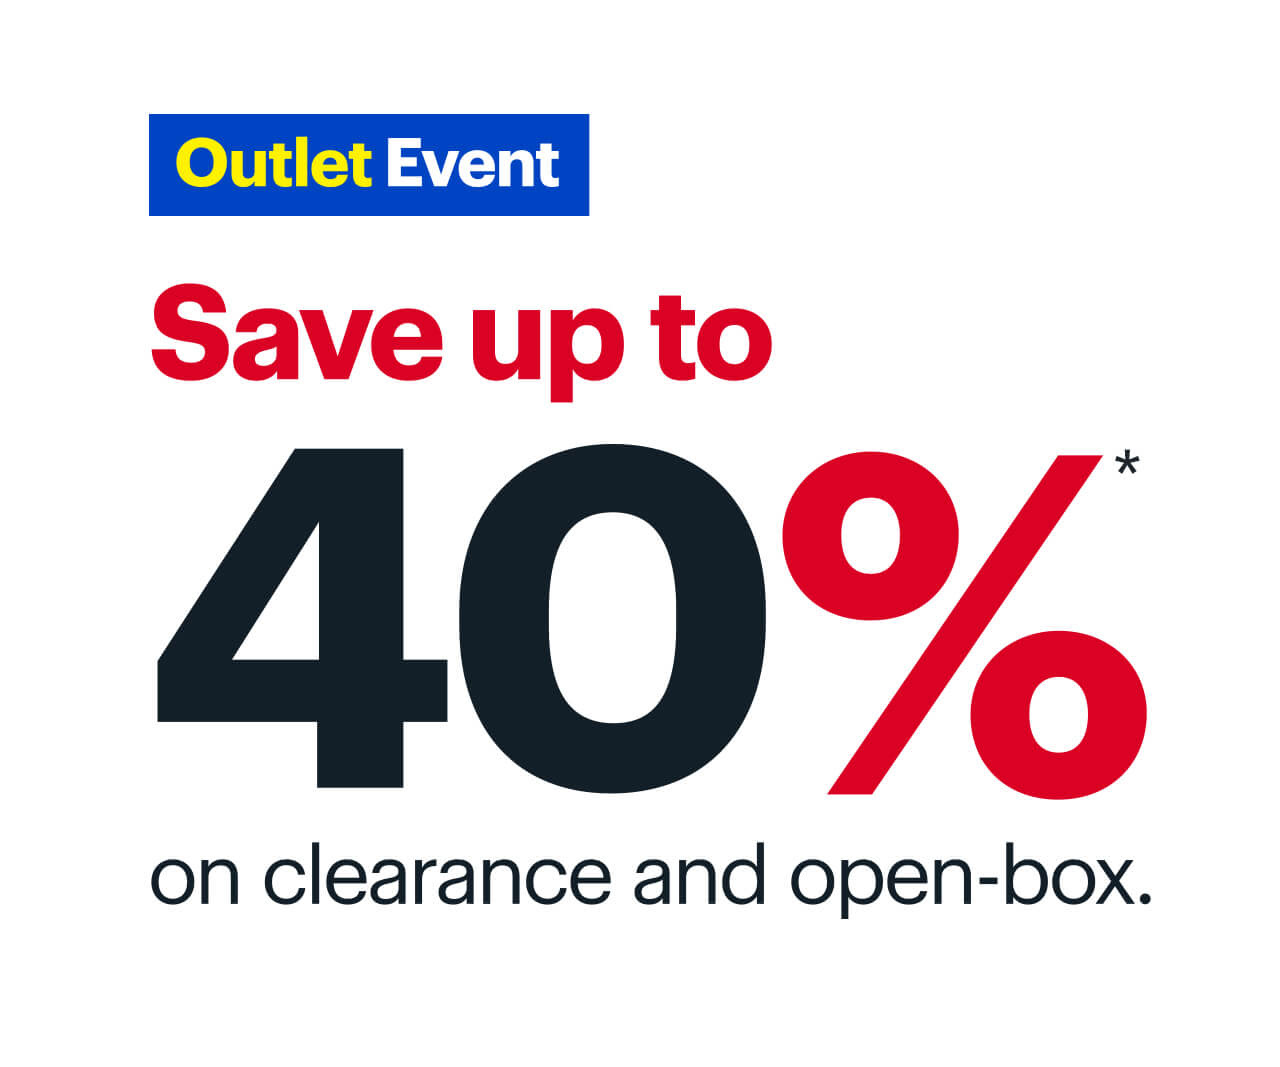 Outlet Event. Save up to 40%* on clearance and open-box. Reference disclaimer.